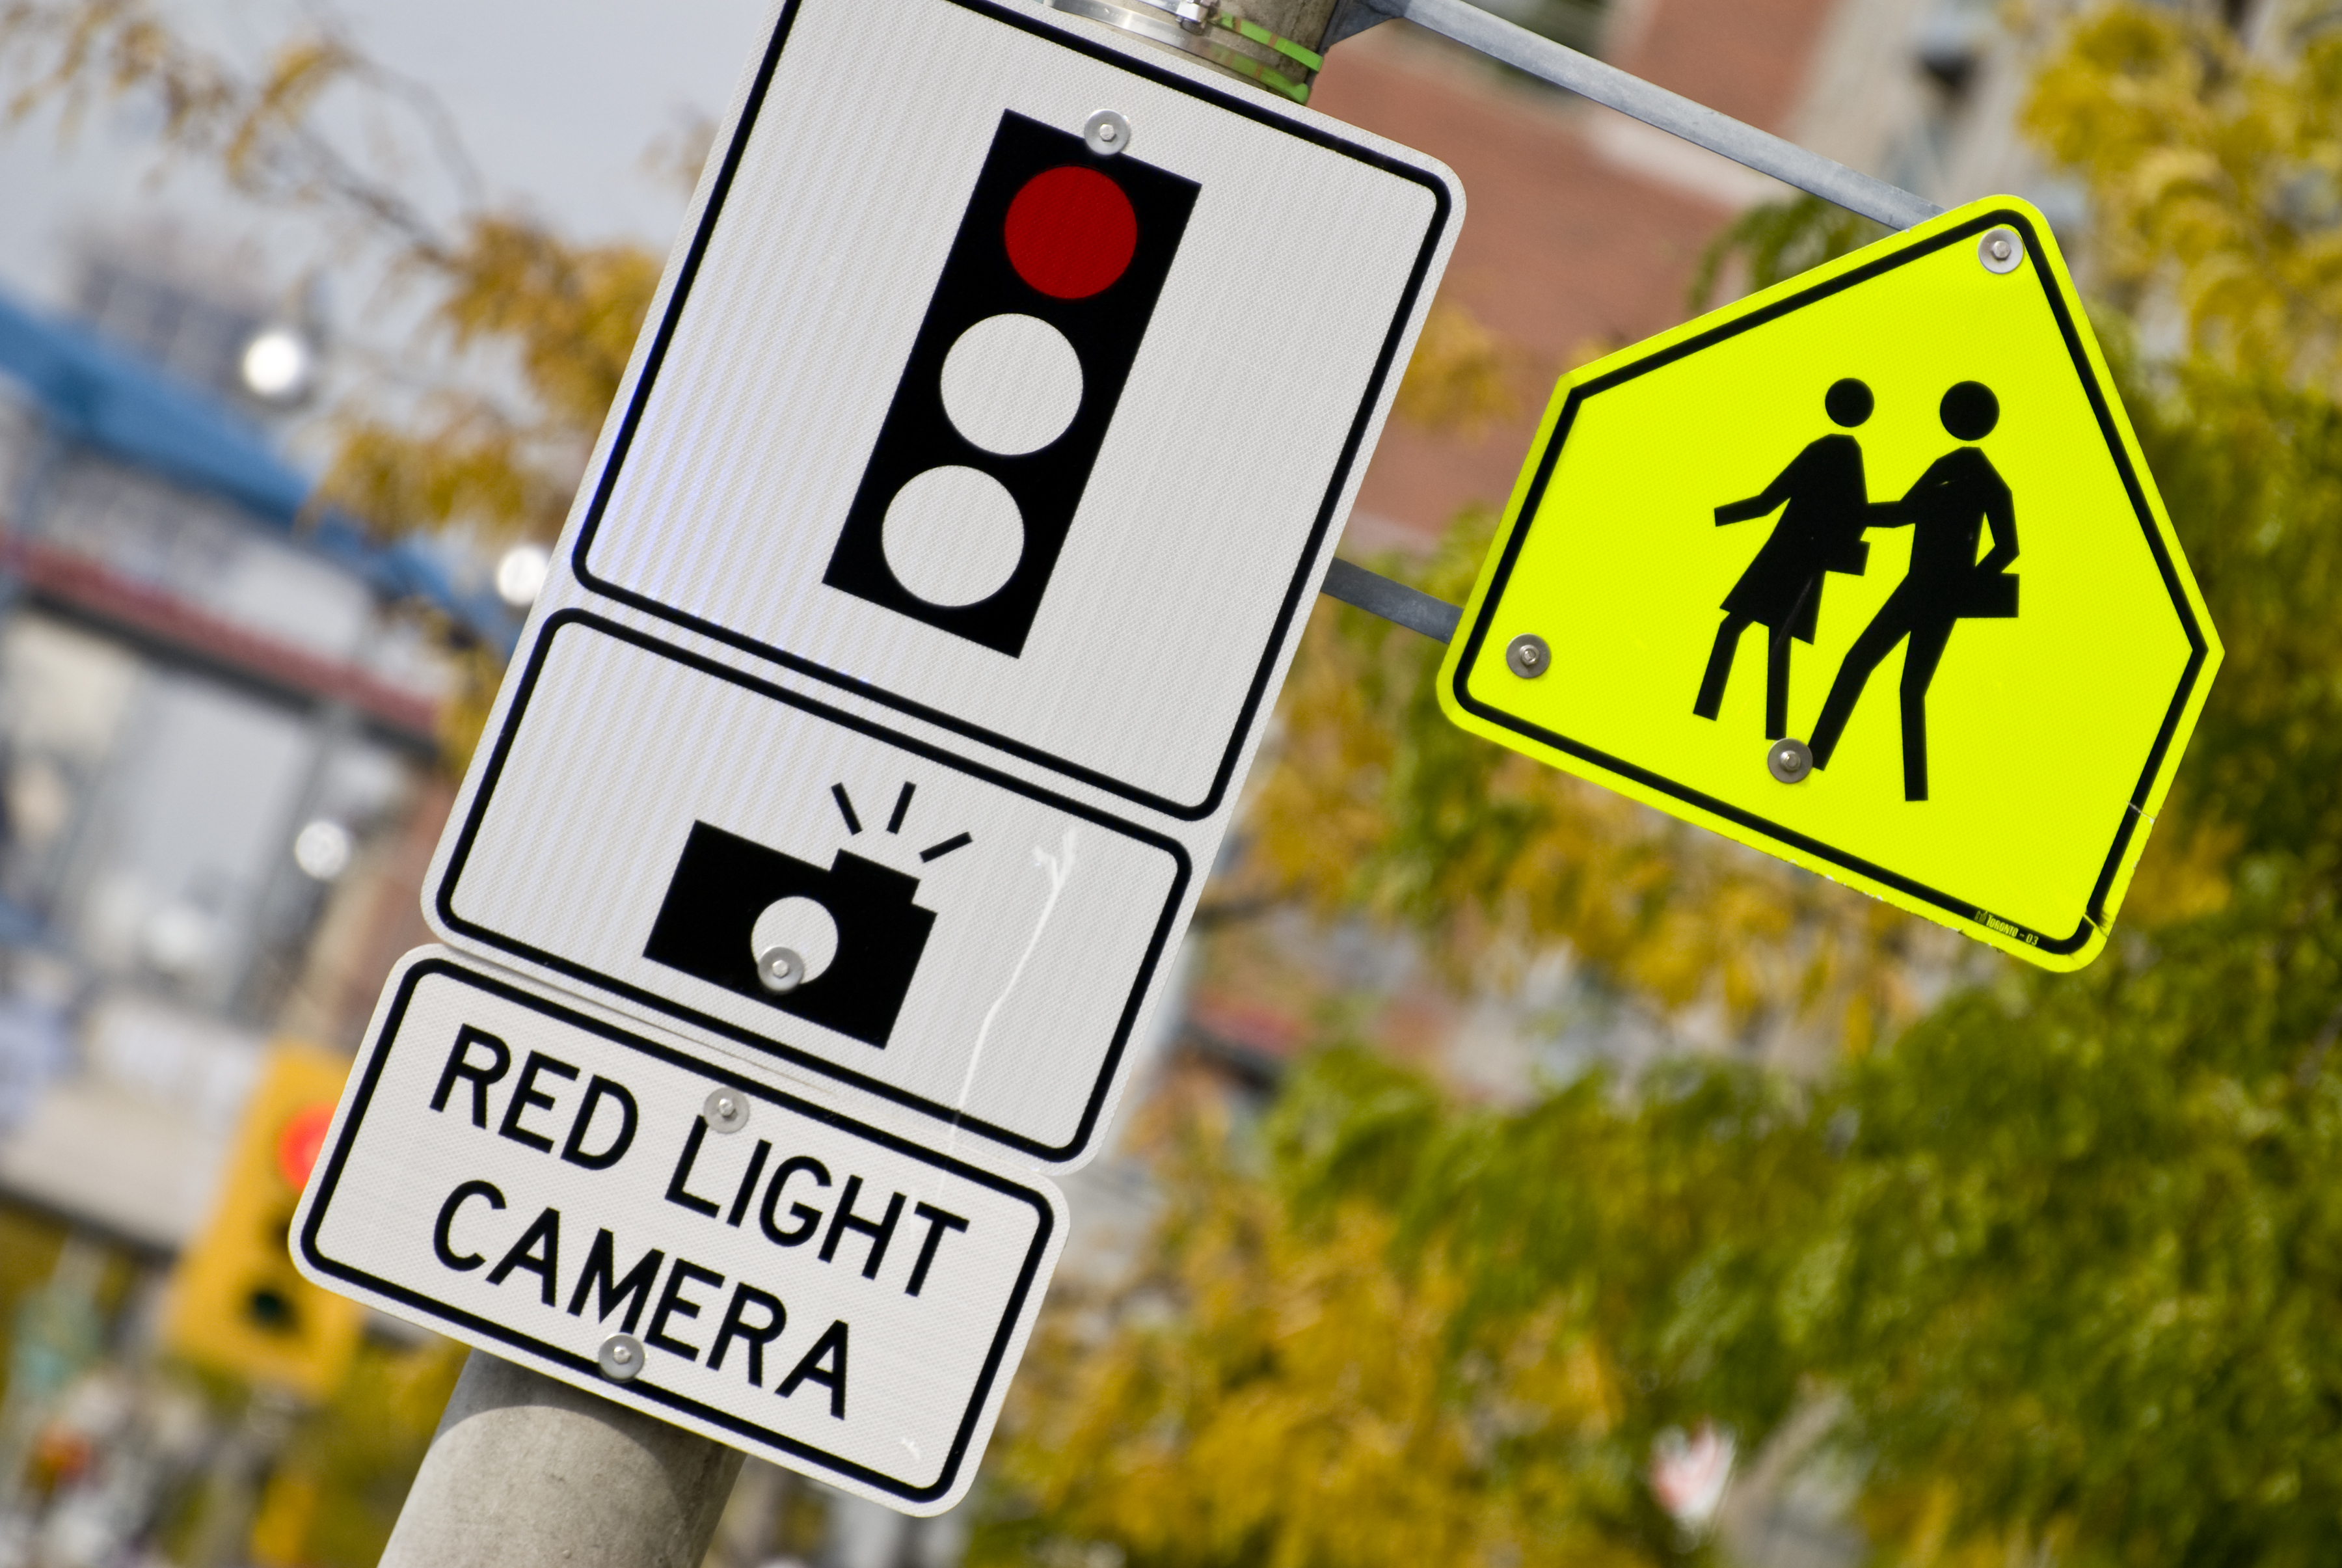 City of Ottawa to install 20 more red light cameras at dangerous intersections - OttawaMatters.com